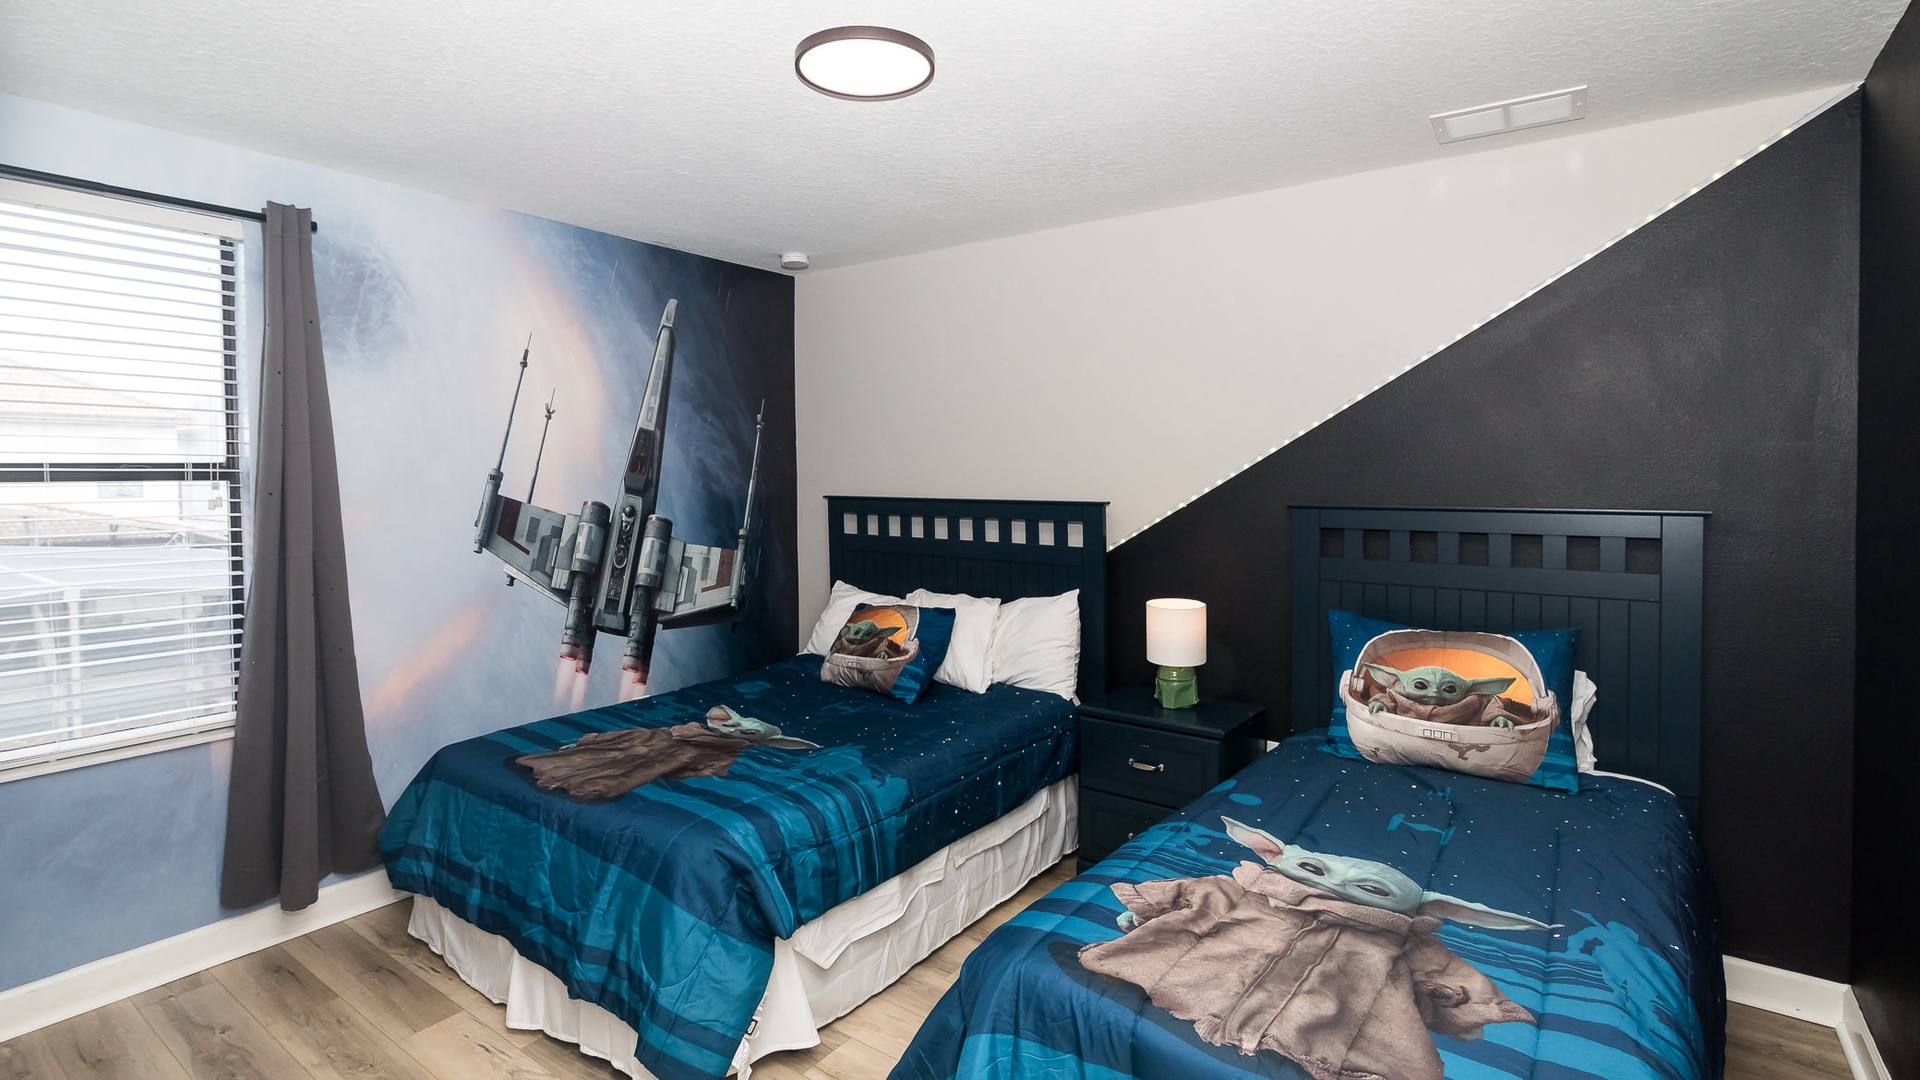 Bedroom 4 Star Wars themed, with Full bed, Twin bed, and Smart TV (2nd floor)